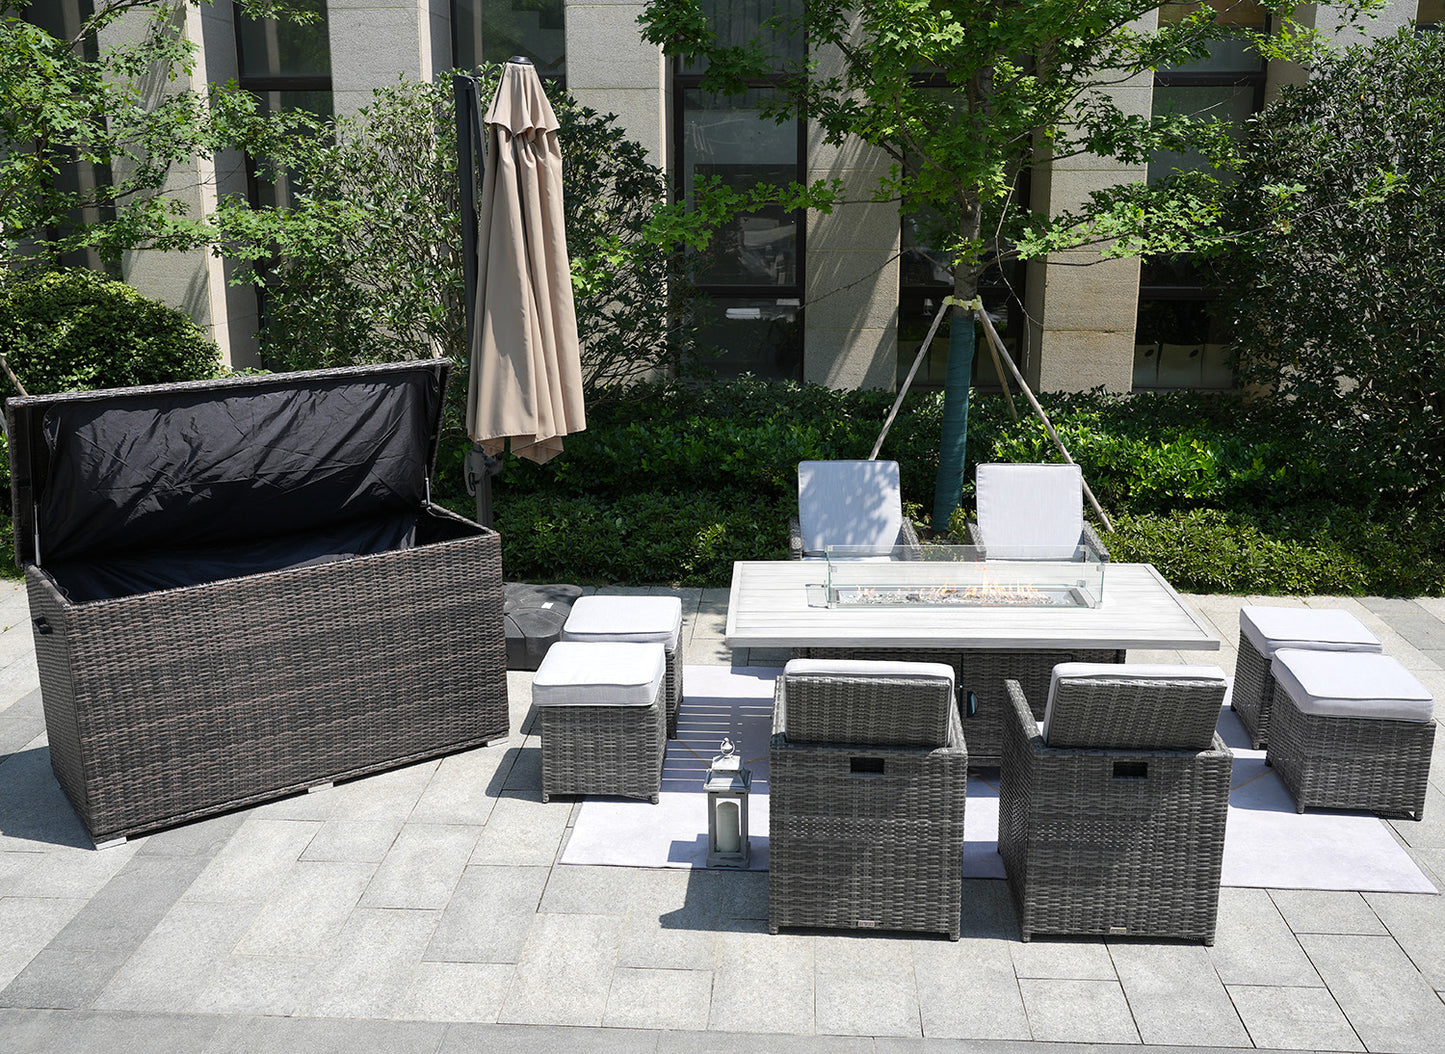 Ten Piece Outdoor Gray Wicker Multiple Chairs Seating Group Fire Pit Included With Cushions